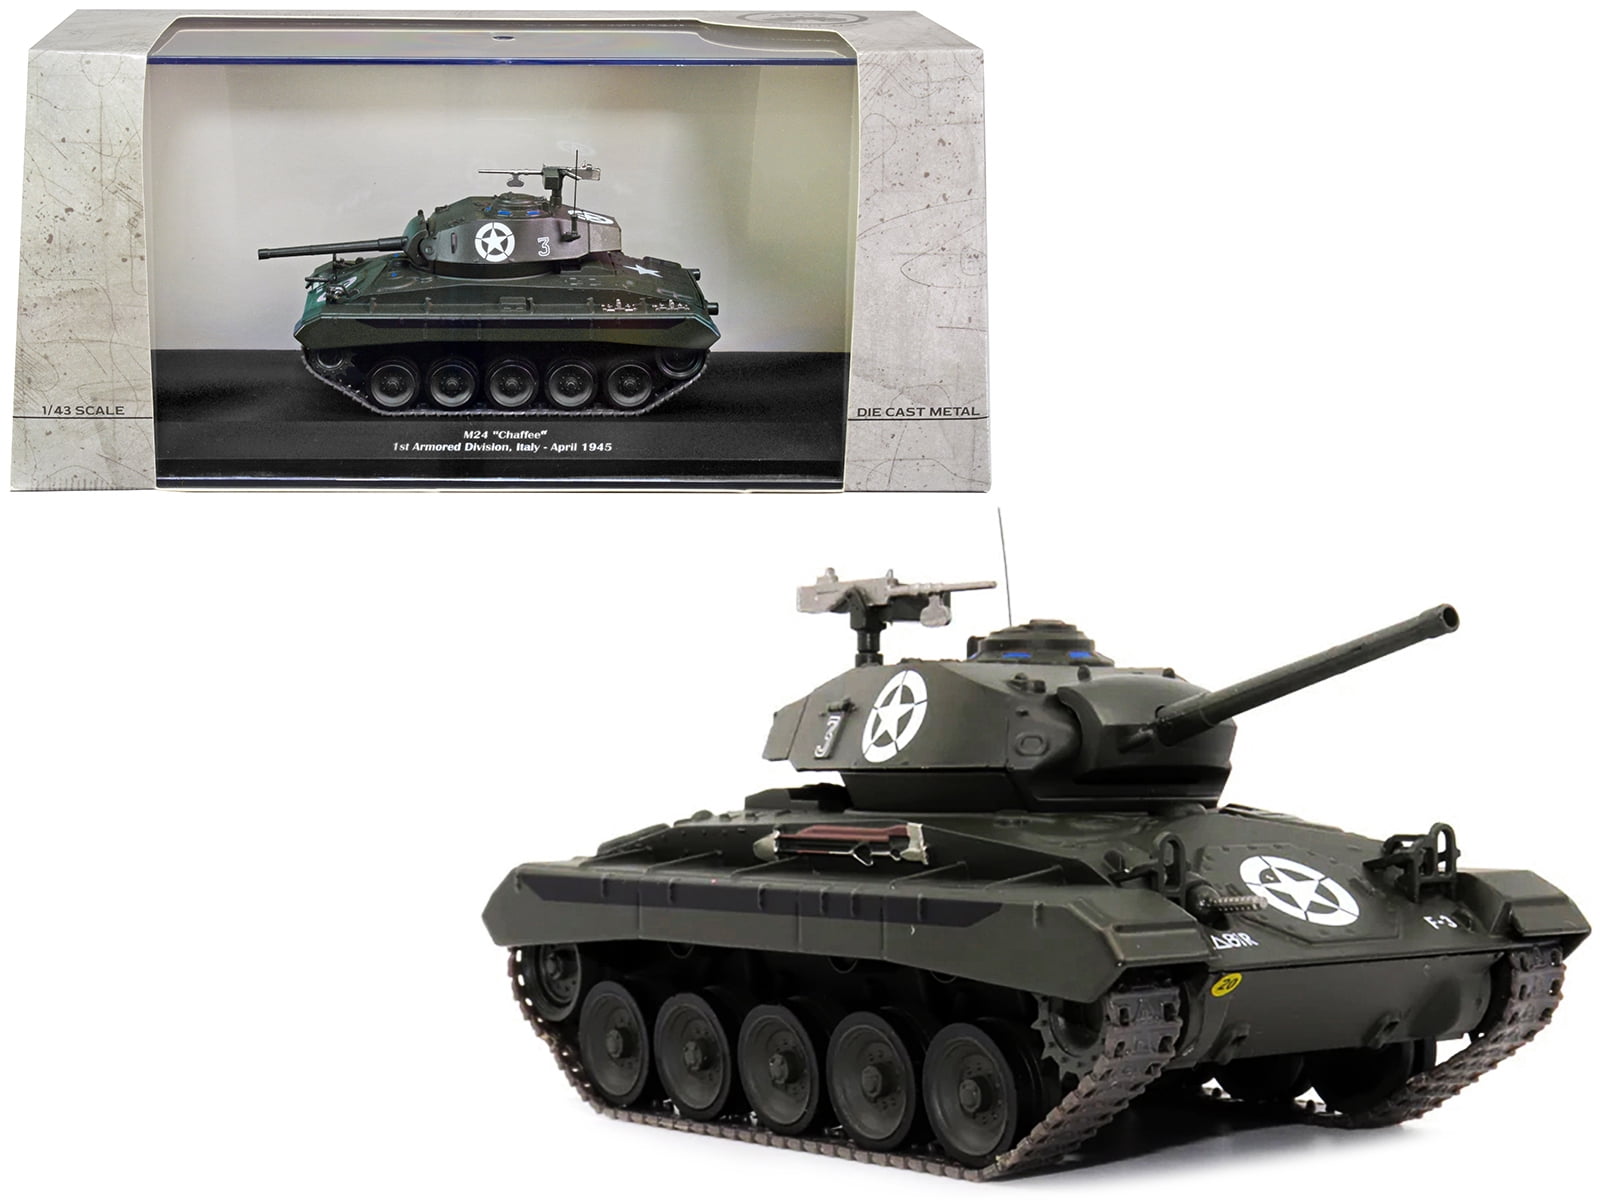 Picture of AFVs of WWII 23196-45 M24 Chaffee Tank No.3 USA 1st Armored Division Italy April 1945 1 by 43 Scale Diecast Model Car